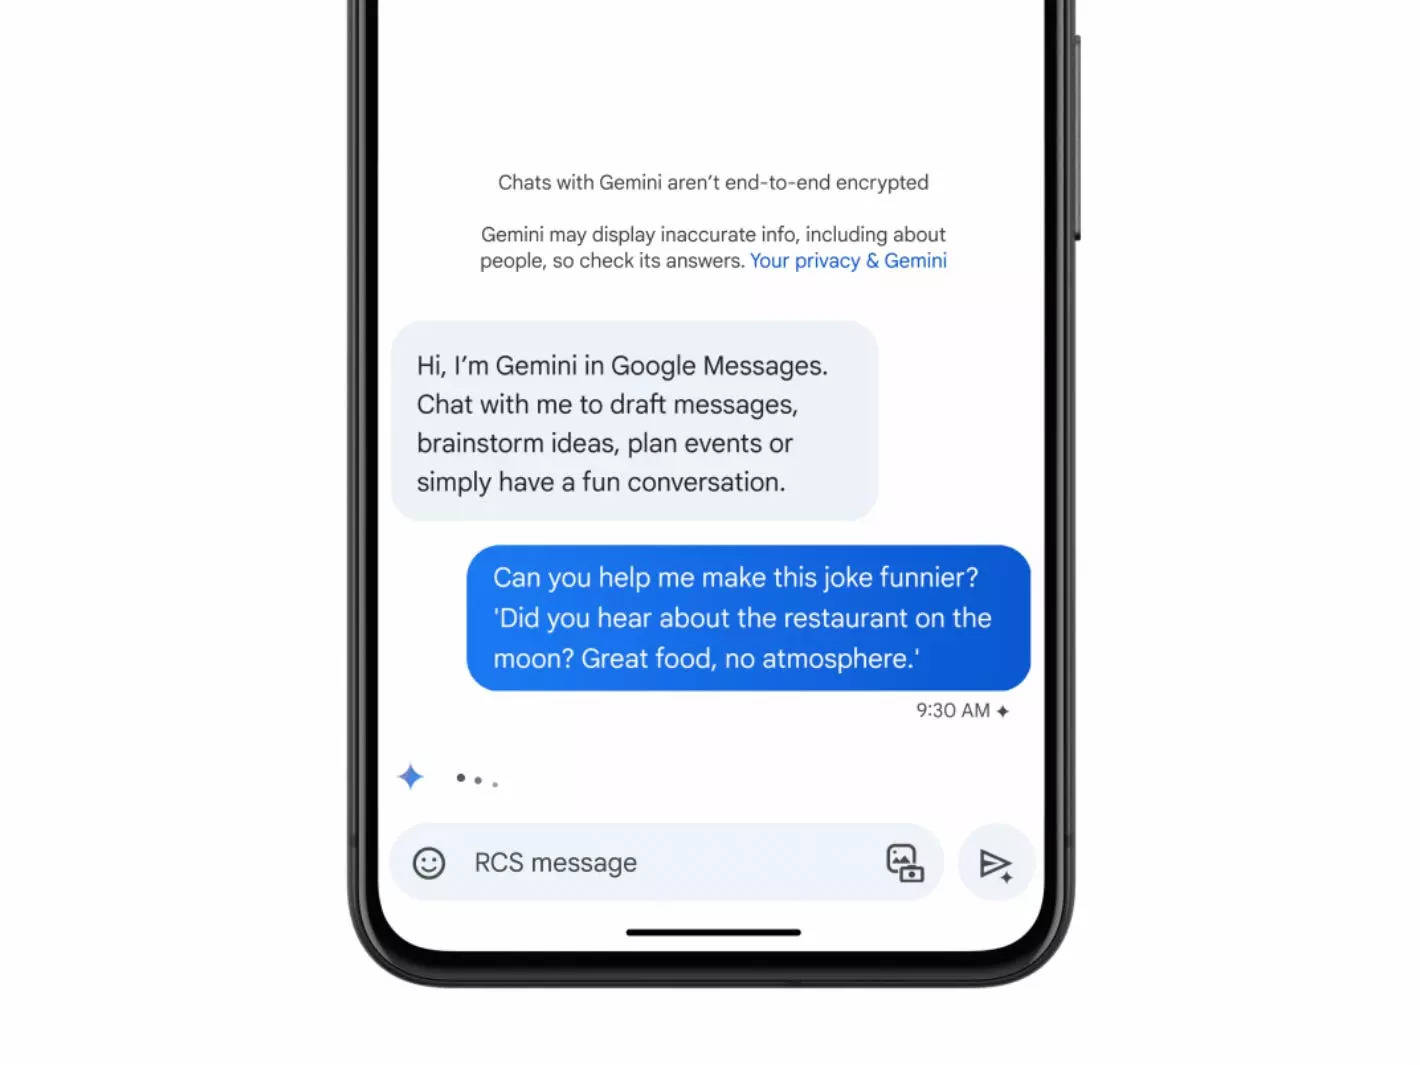 Gemini chatbot in Google messages